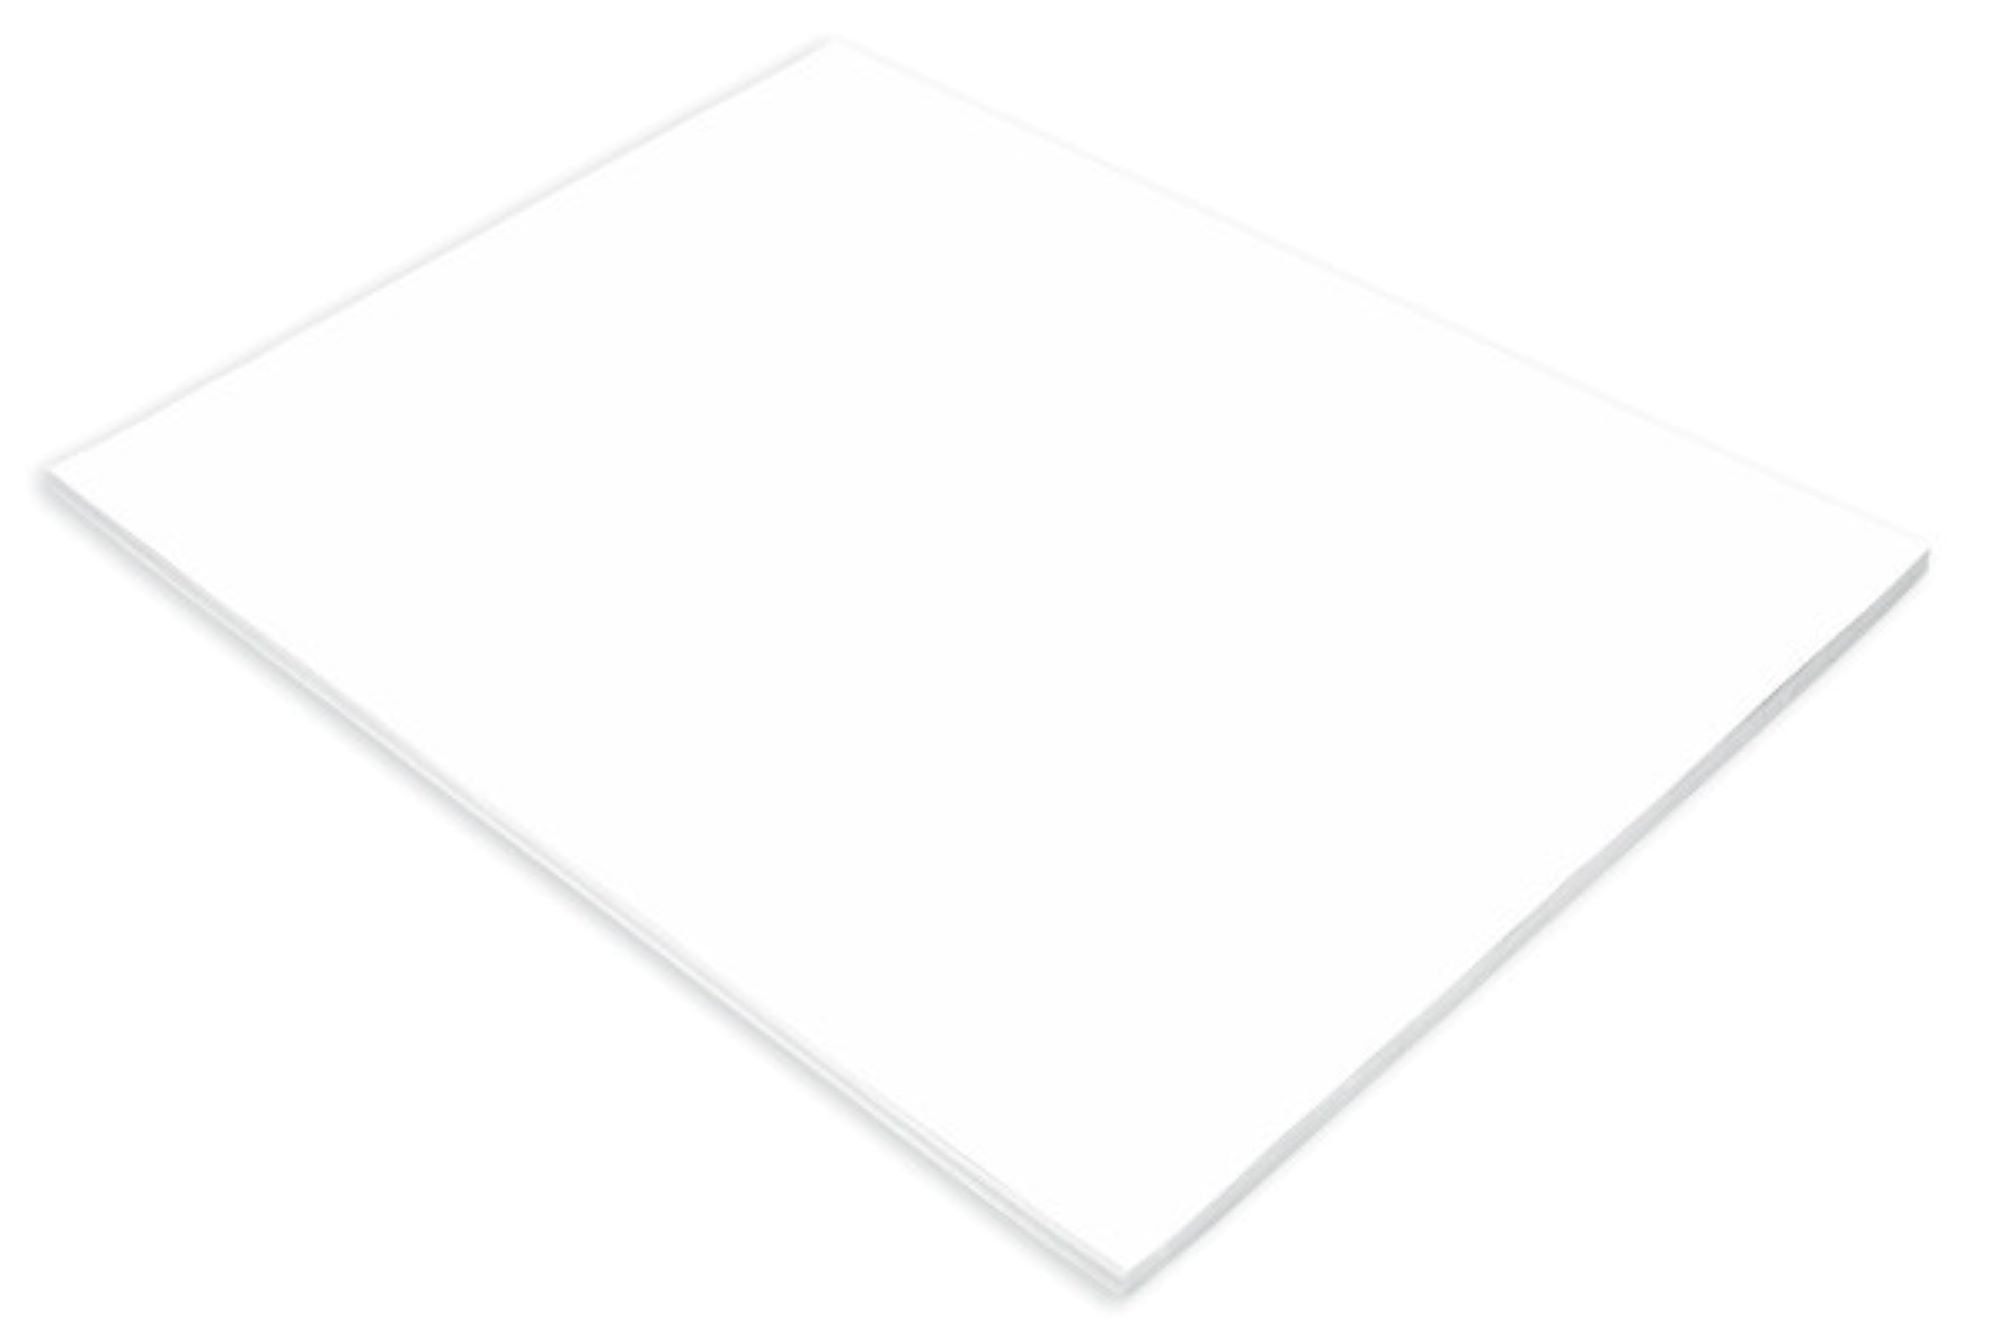 12 Packs: 50 ct. (600 total) 12 x 18 White Construction Paper by  Creatology® 